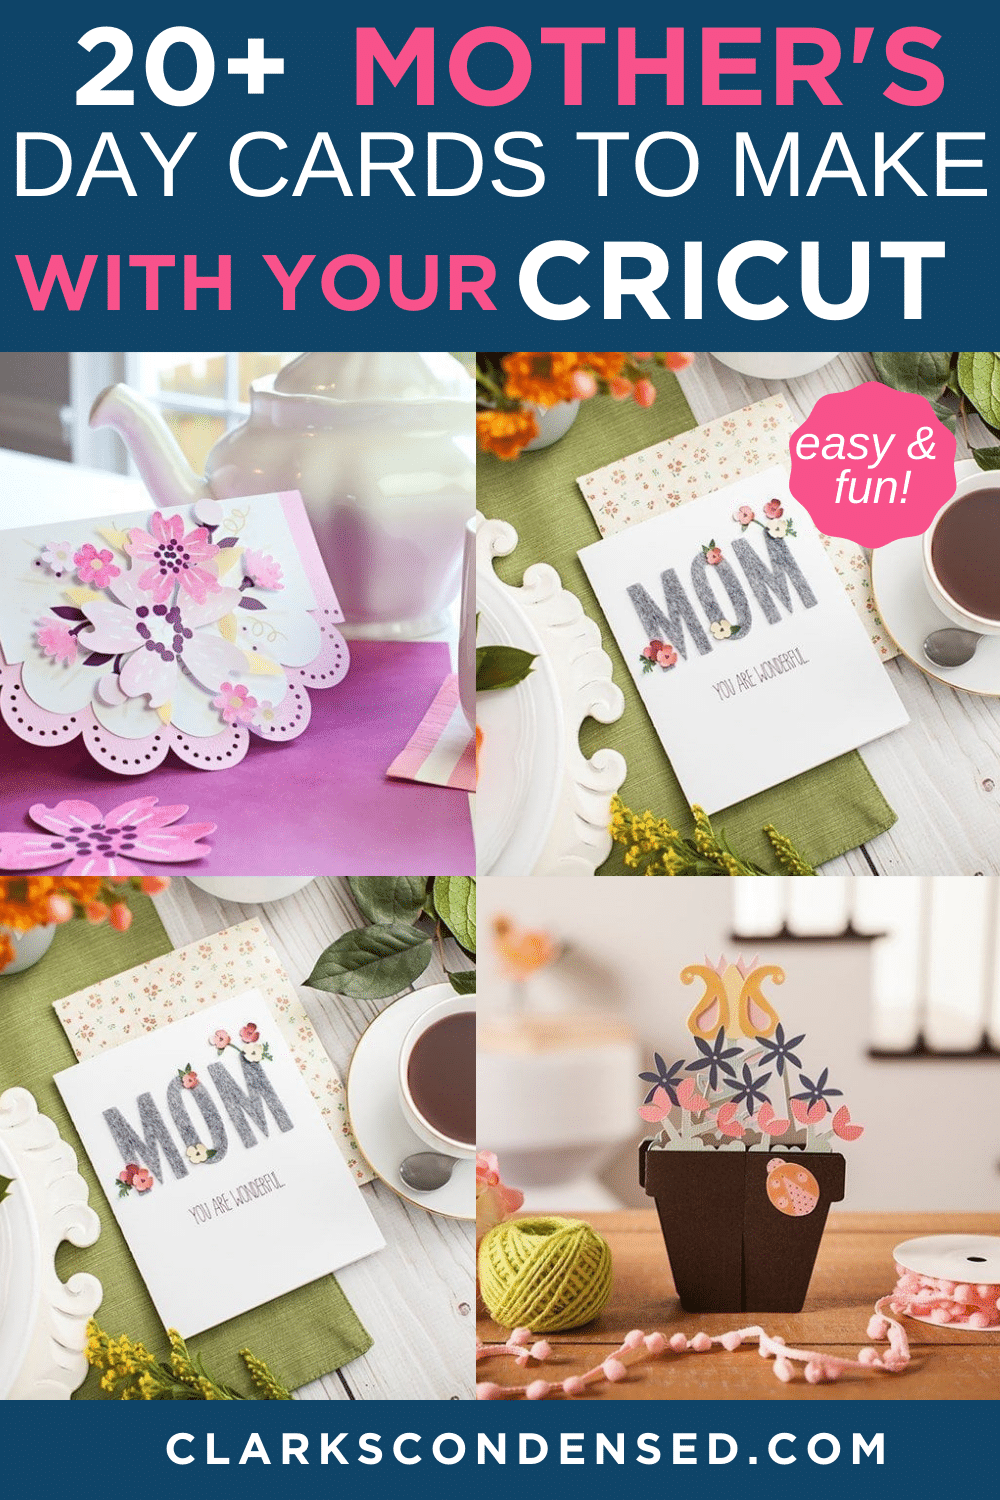 Cricut Mother's Day Cards